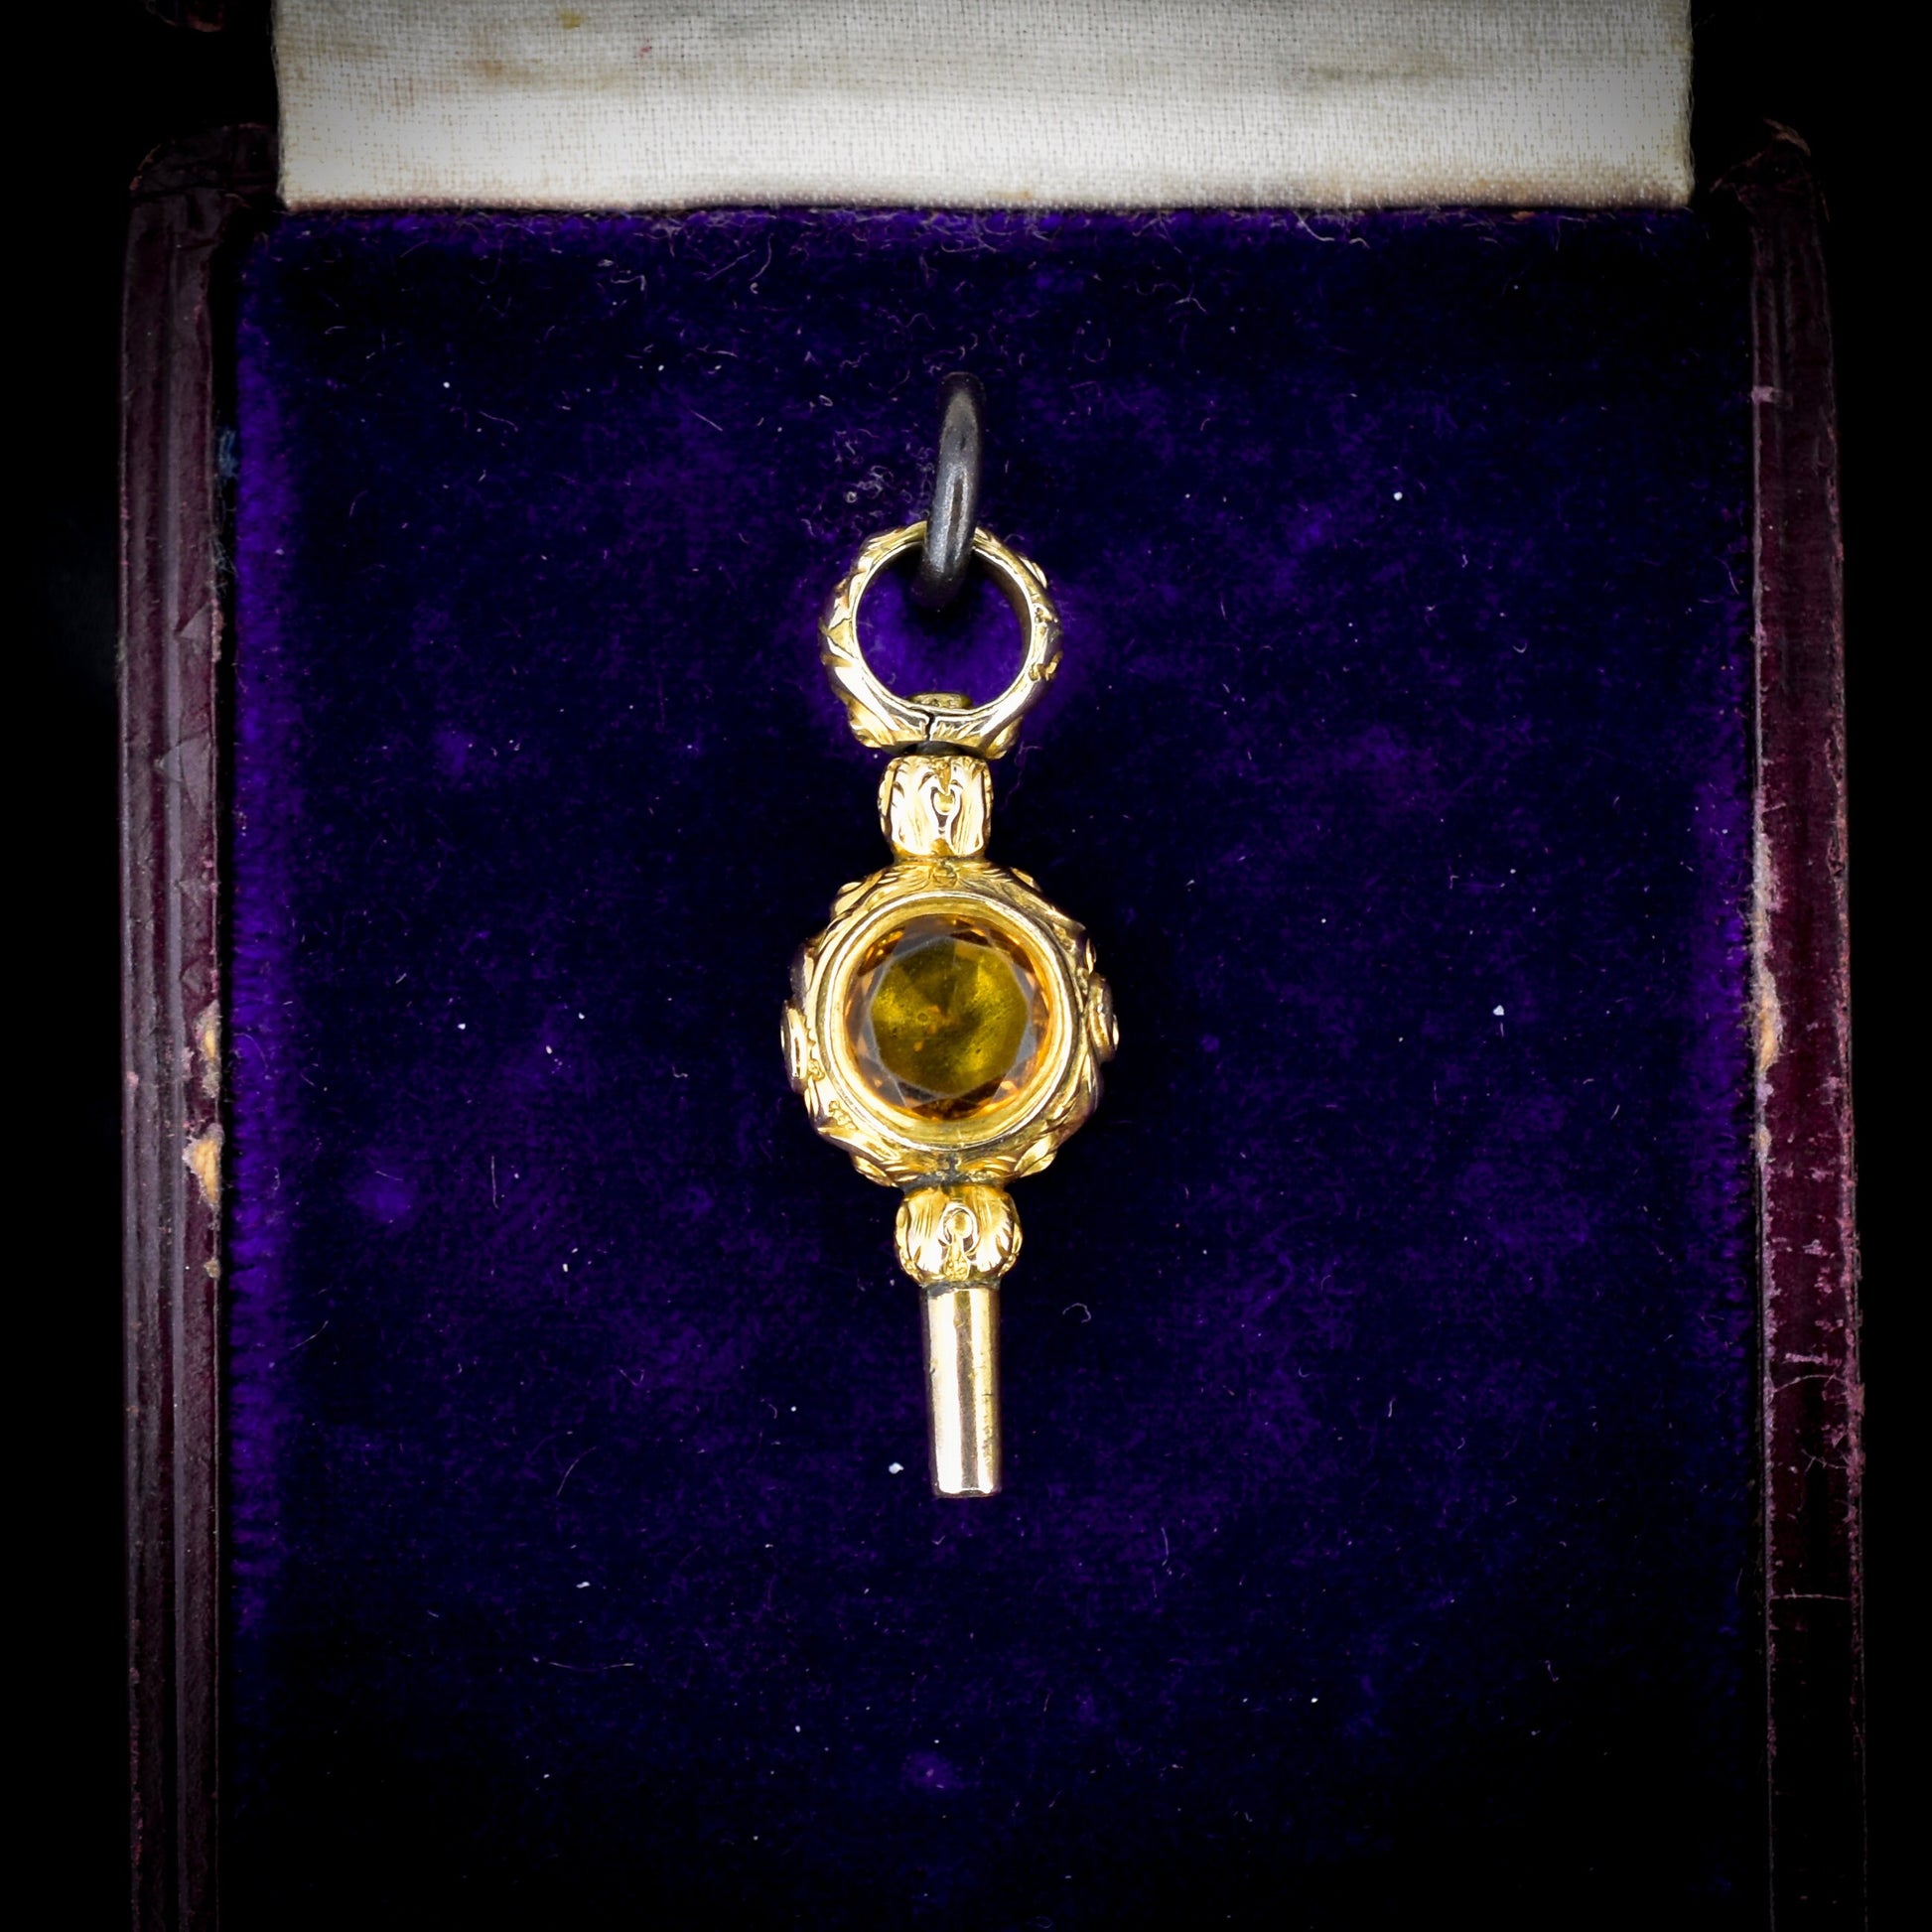 Antique Foiled Citrine and Chalcedony Gold Watch Key Fob Pendant Charm - Victorian